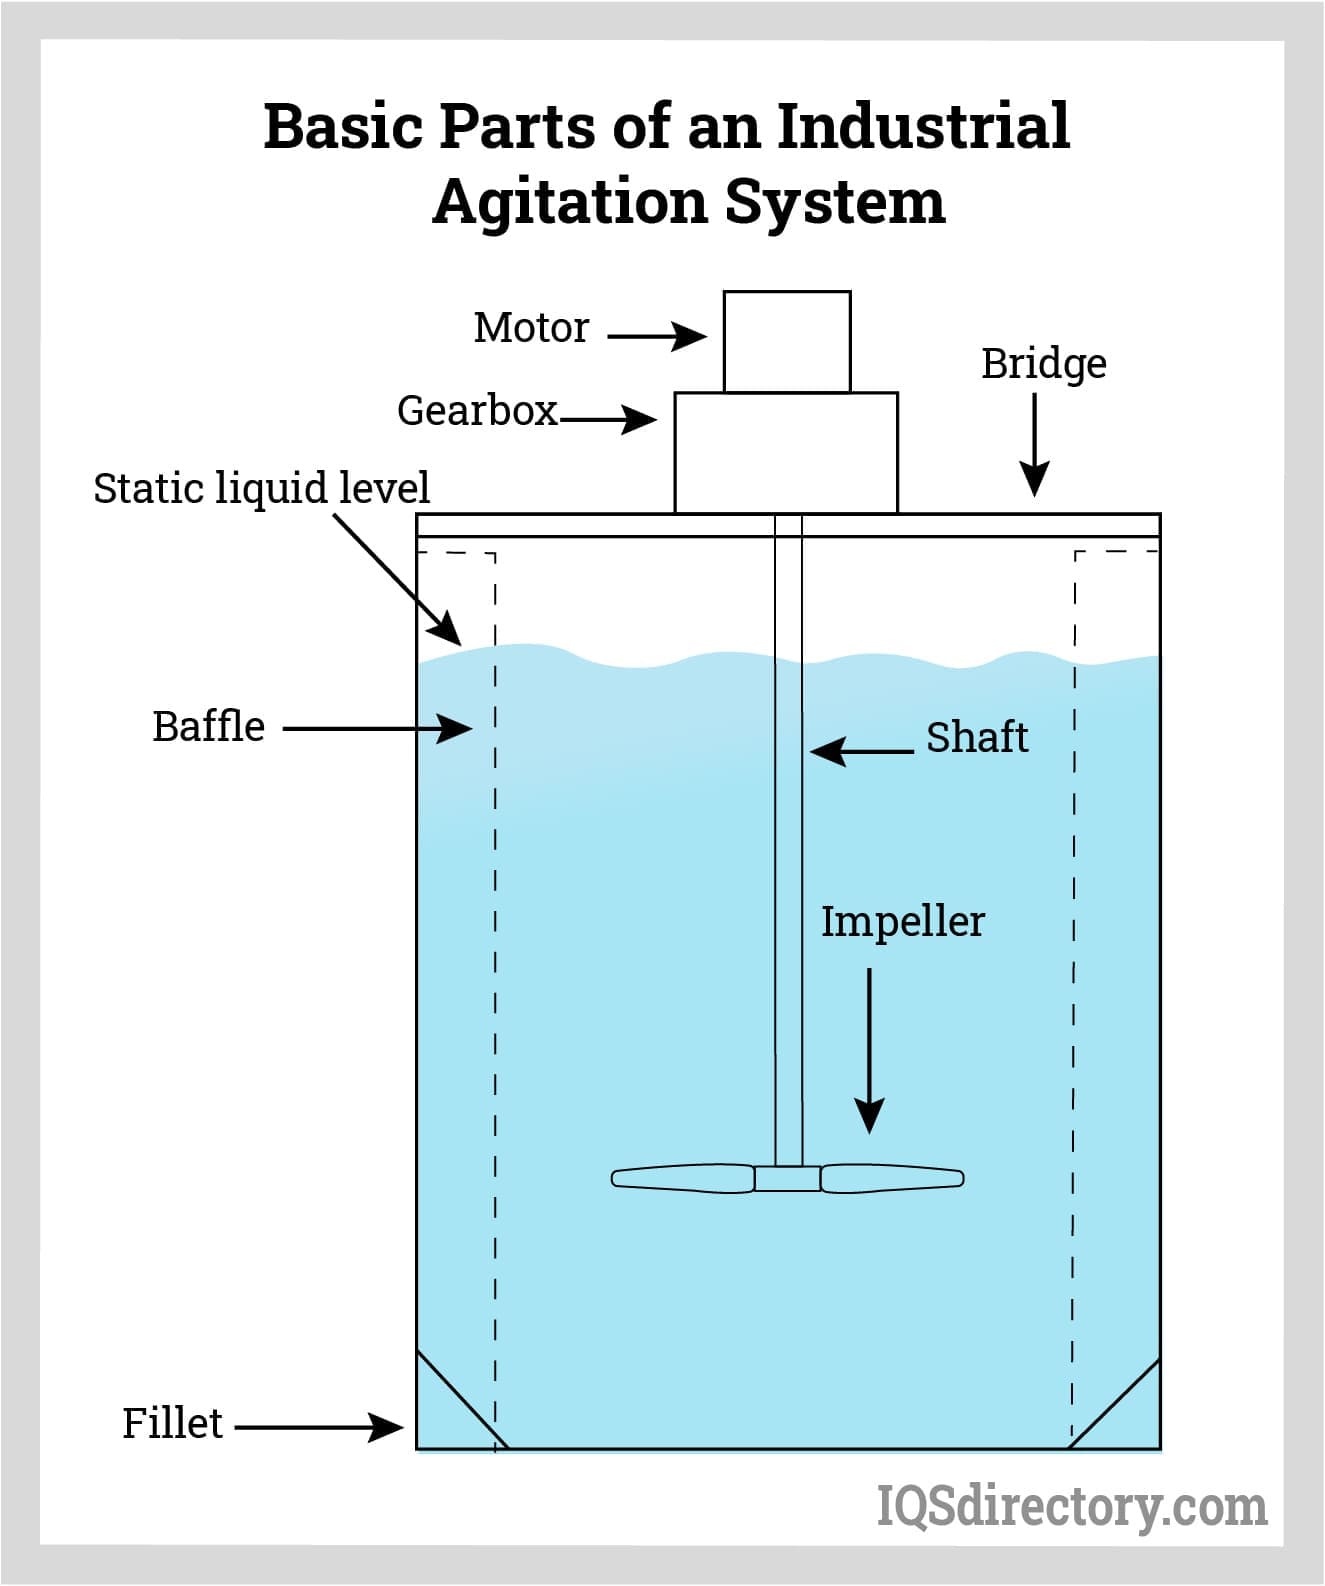 Basic Parts of an Industrial Agitation System